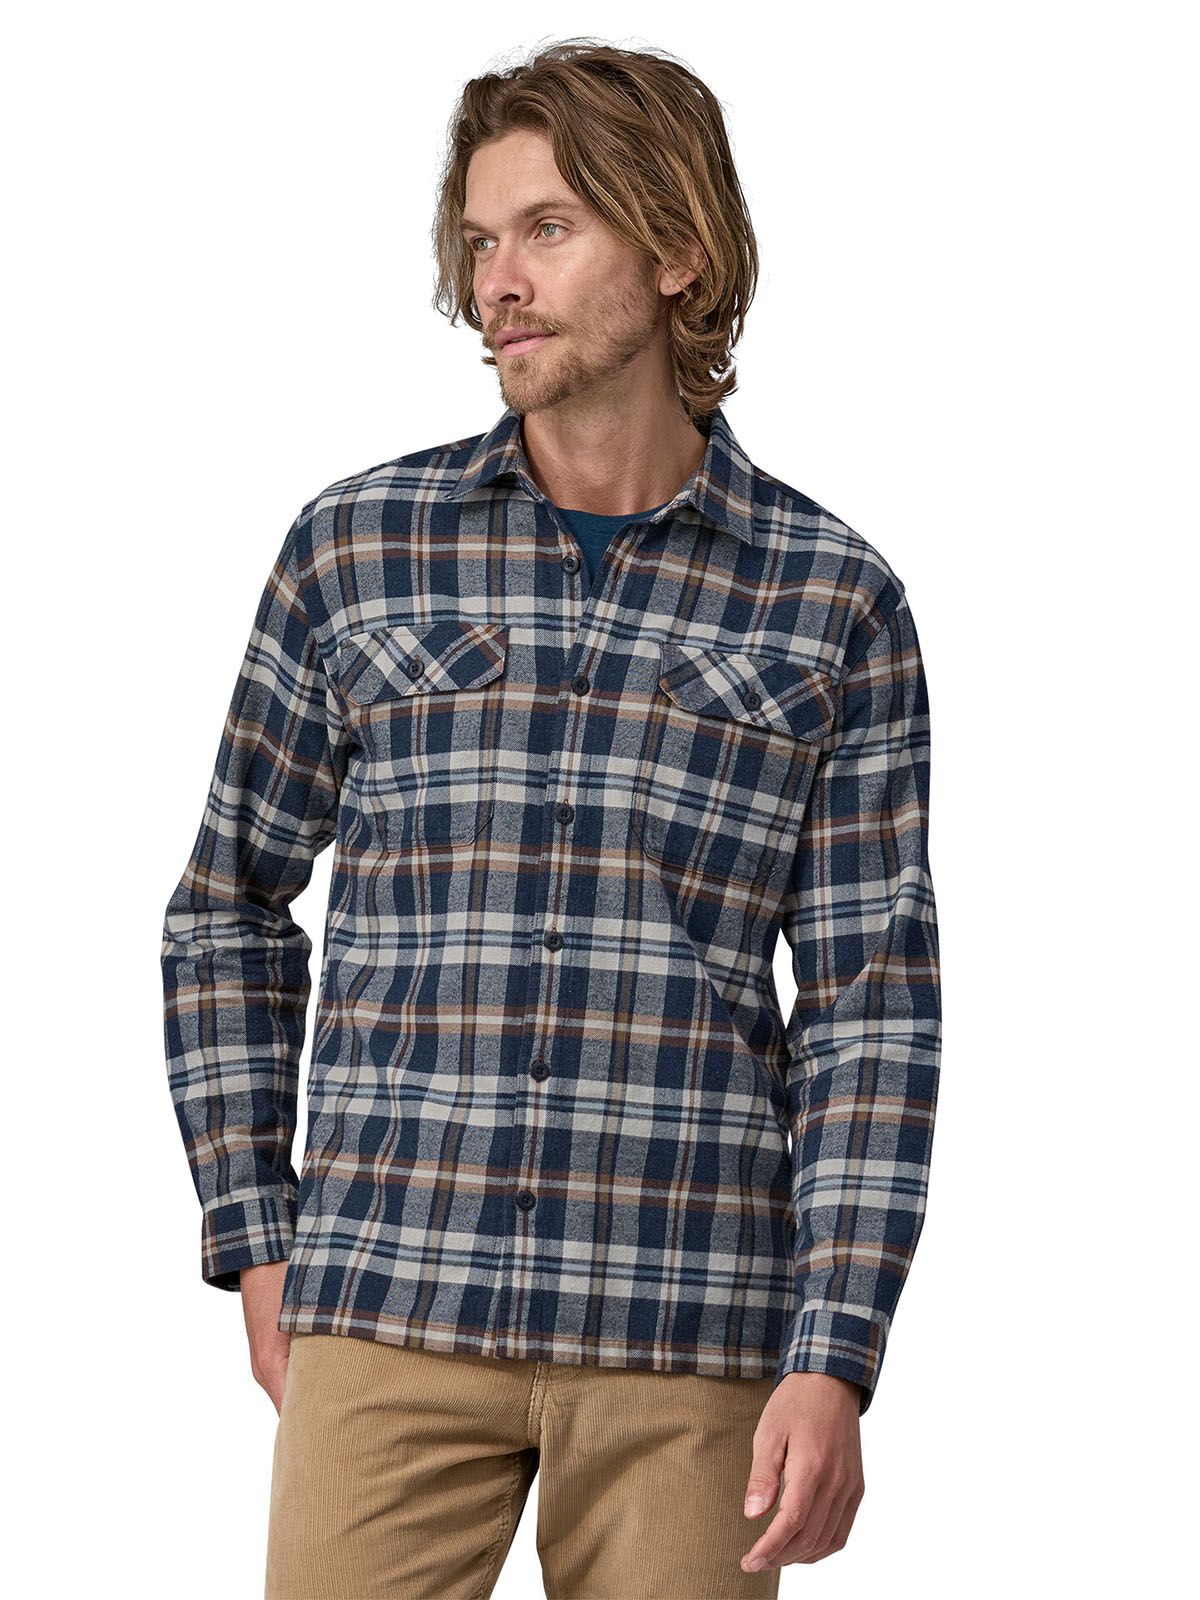 Camicie casual Uomo Patagonia - L/S Organic Cotton Midweight Fjord Flannel Shirt - Blu